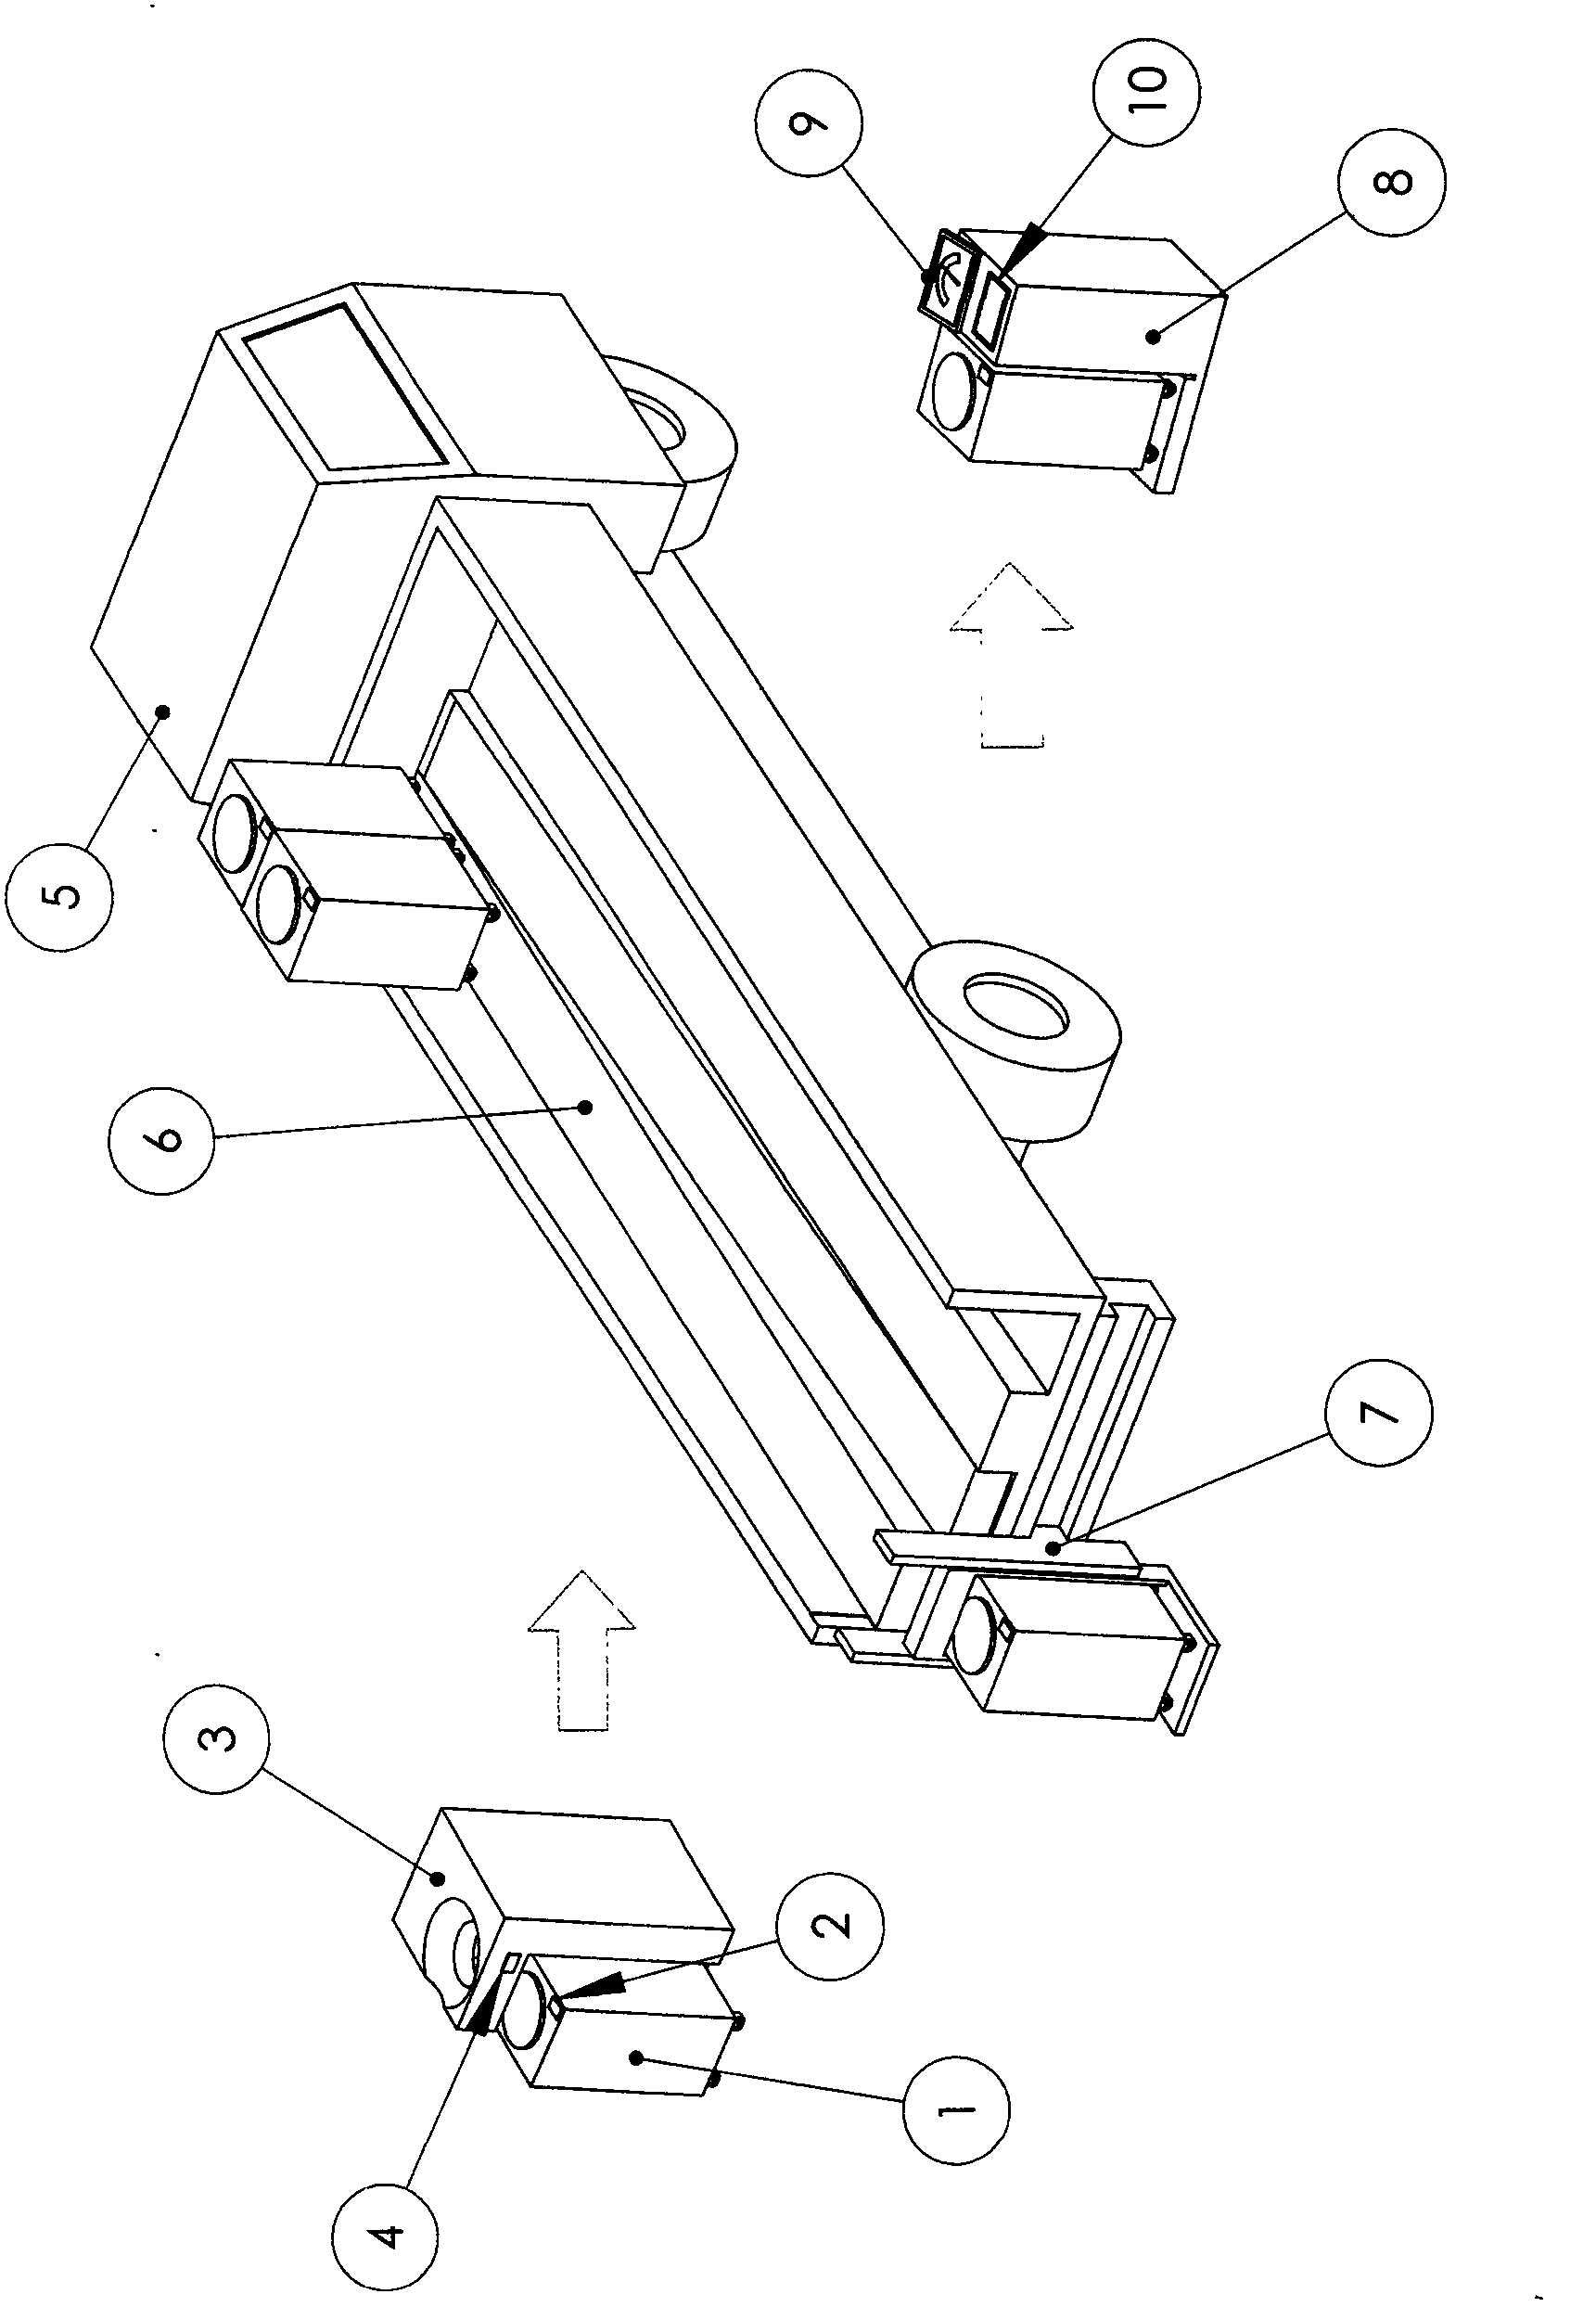 Method for conveying food waste by standard circulation box with recording and counting functions